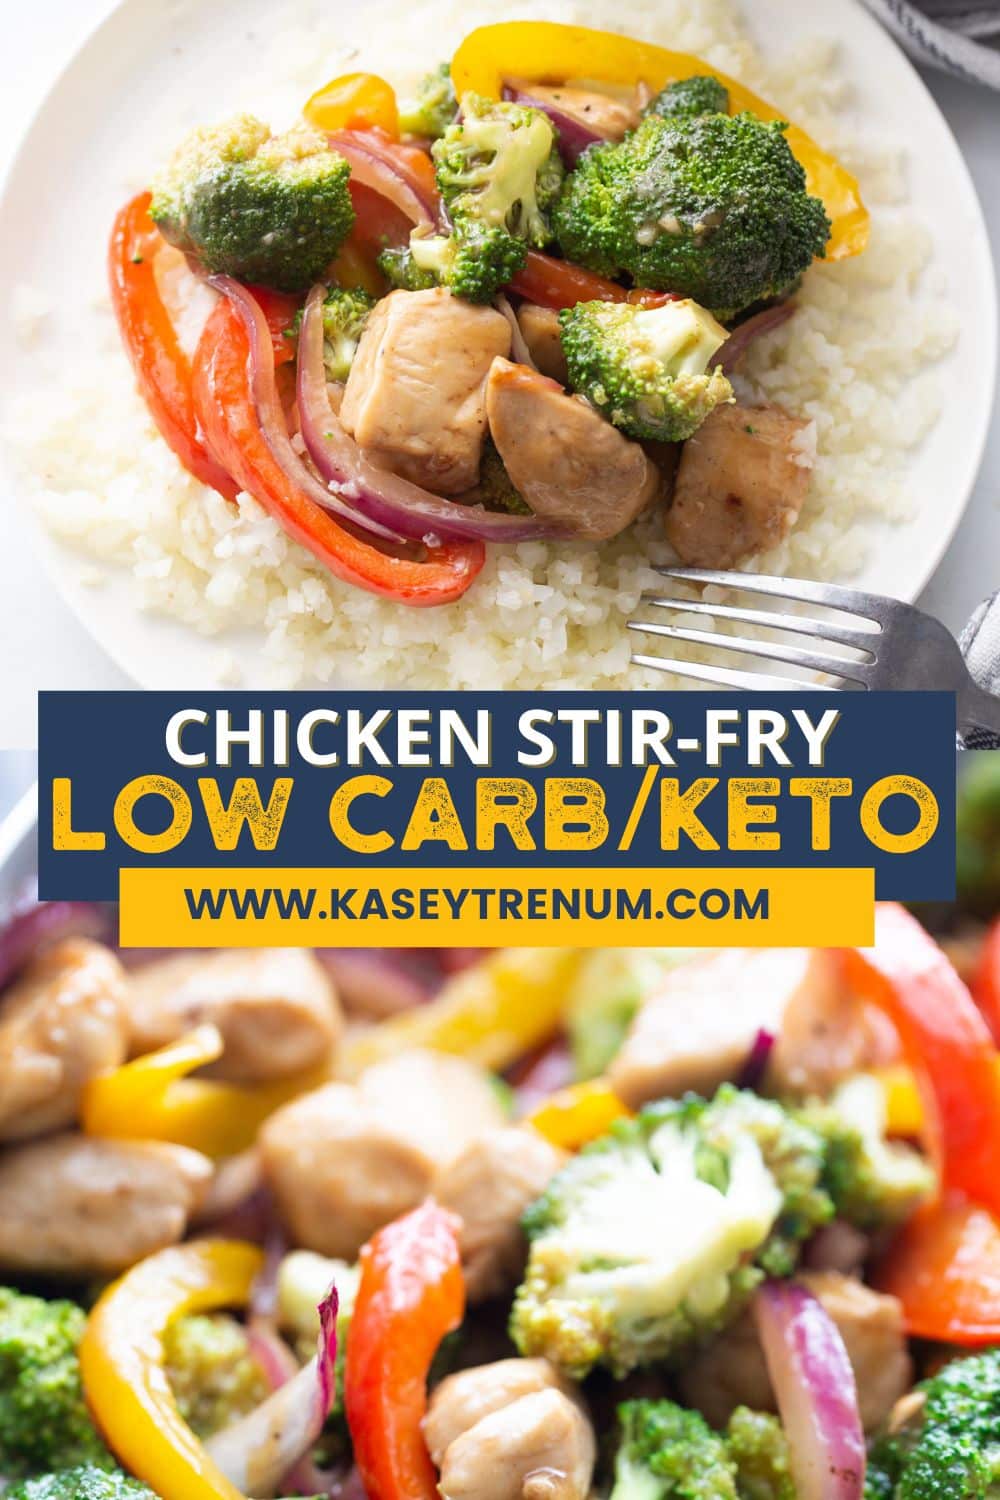 collage image of plated keto chicken stir fry over a bed of cauliflower rice with a blue banner and white and yellow lettering